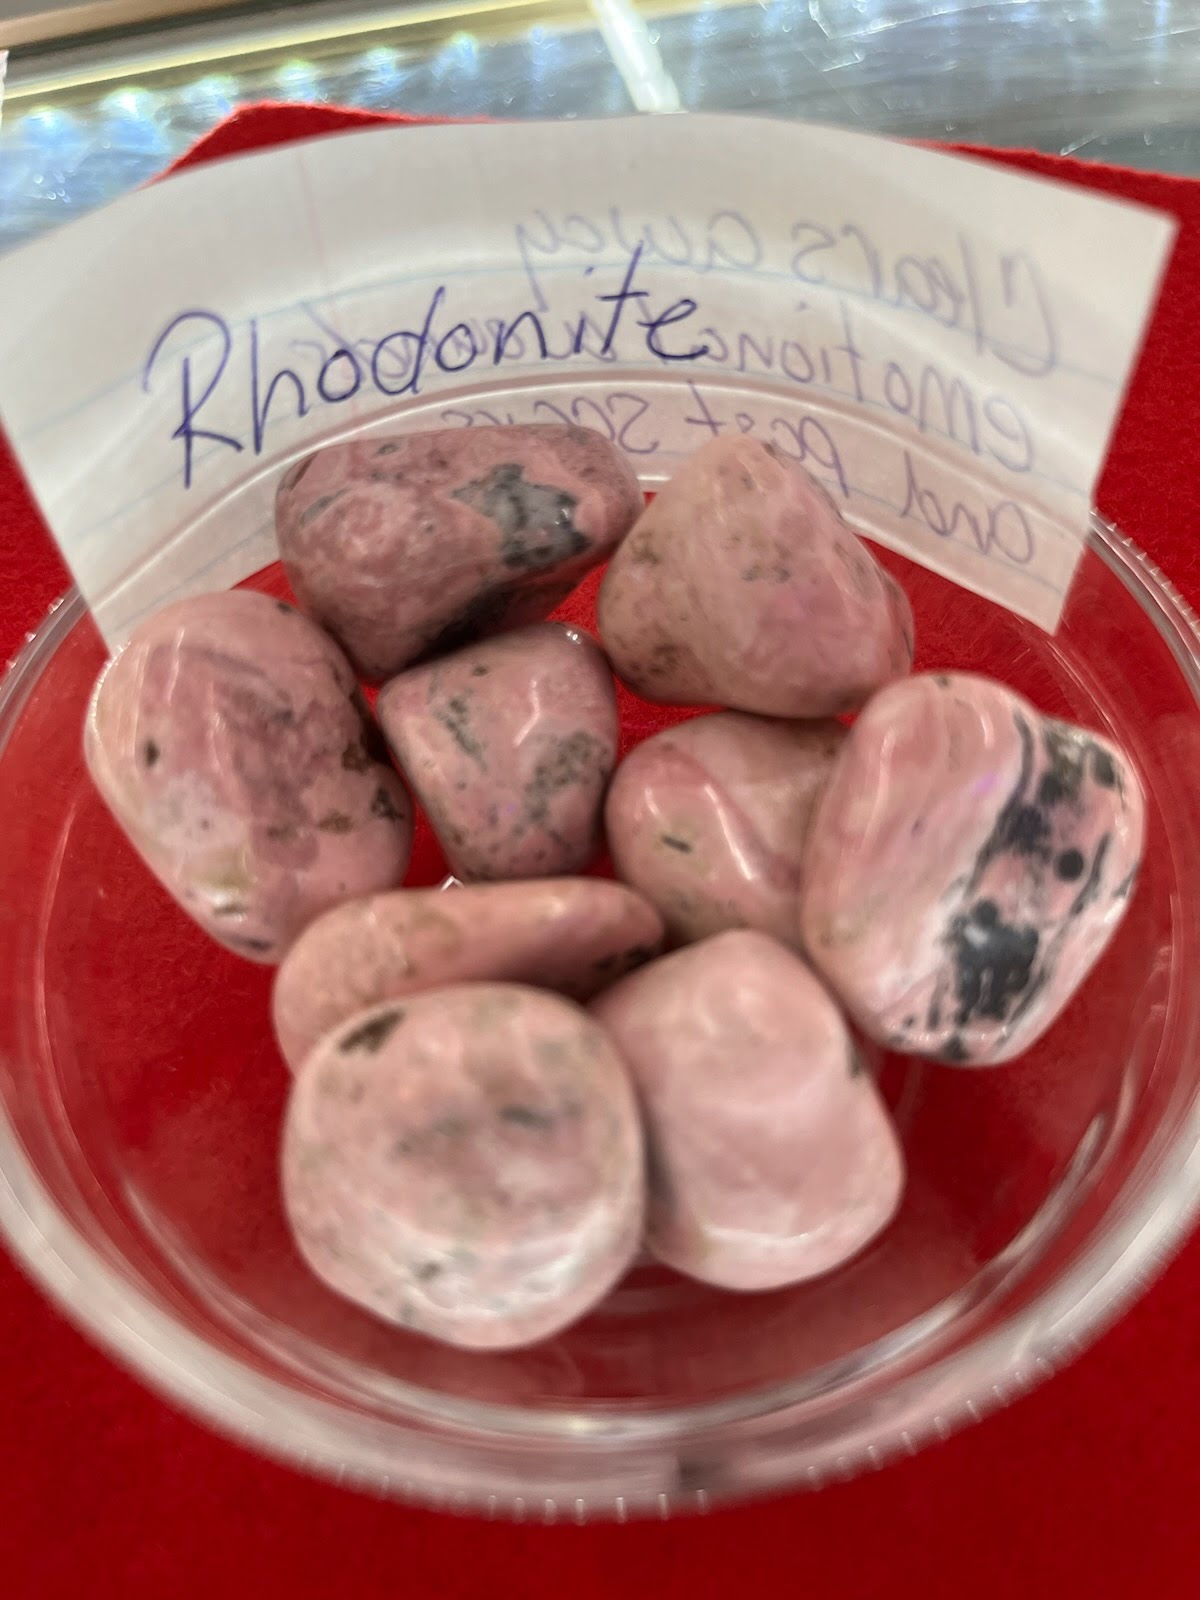 A bowl of rhodonite rocks with a note on the side.